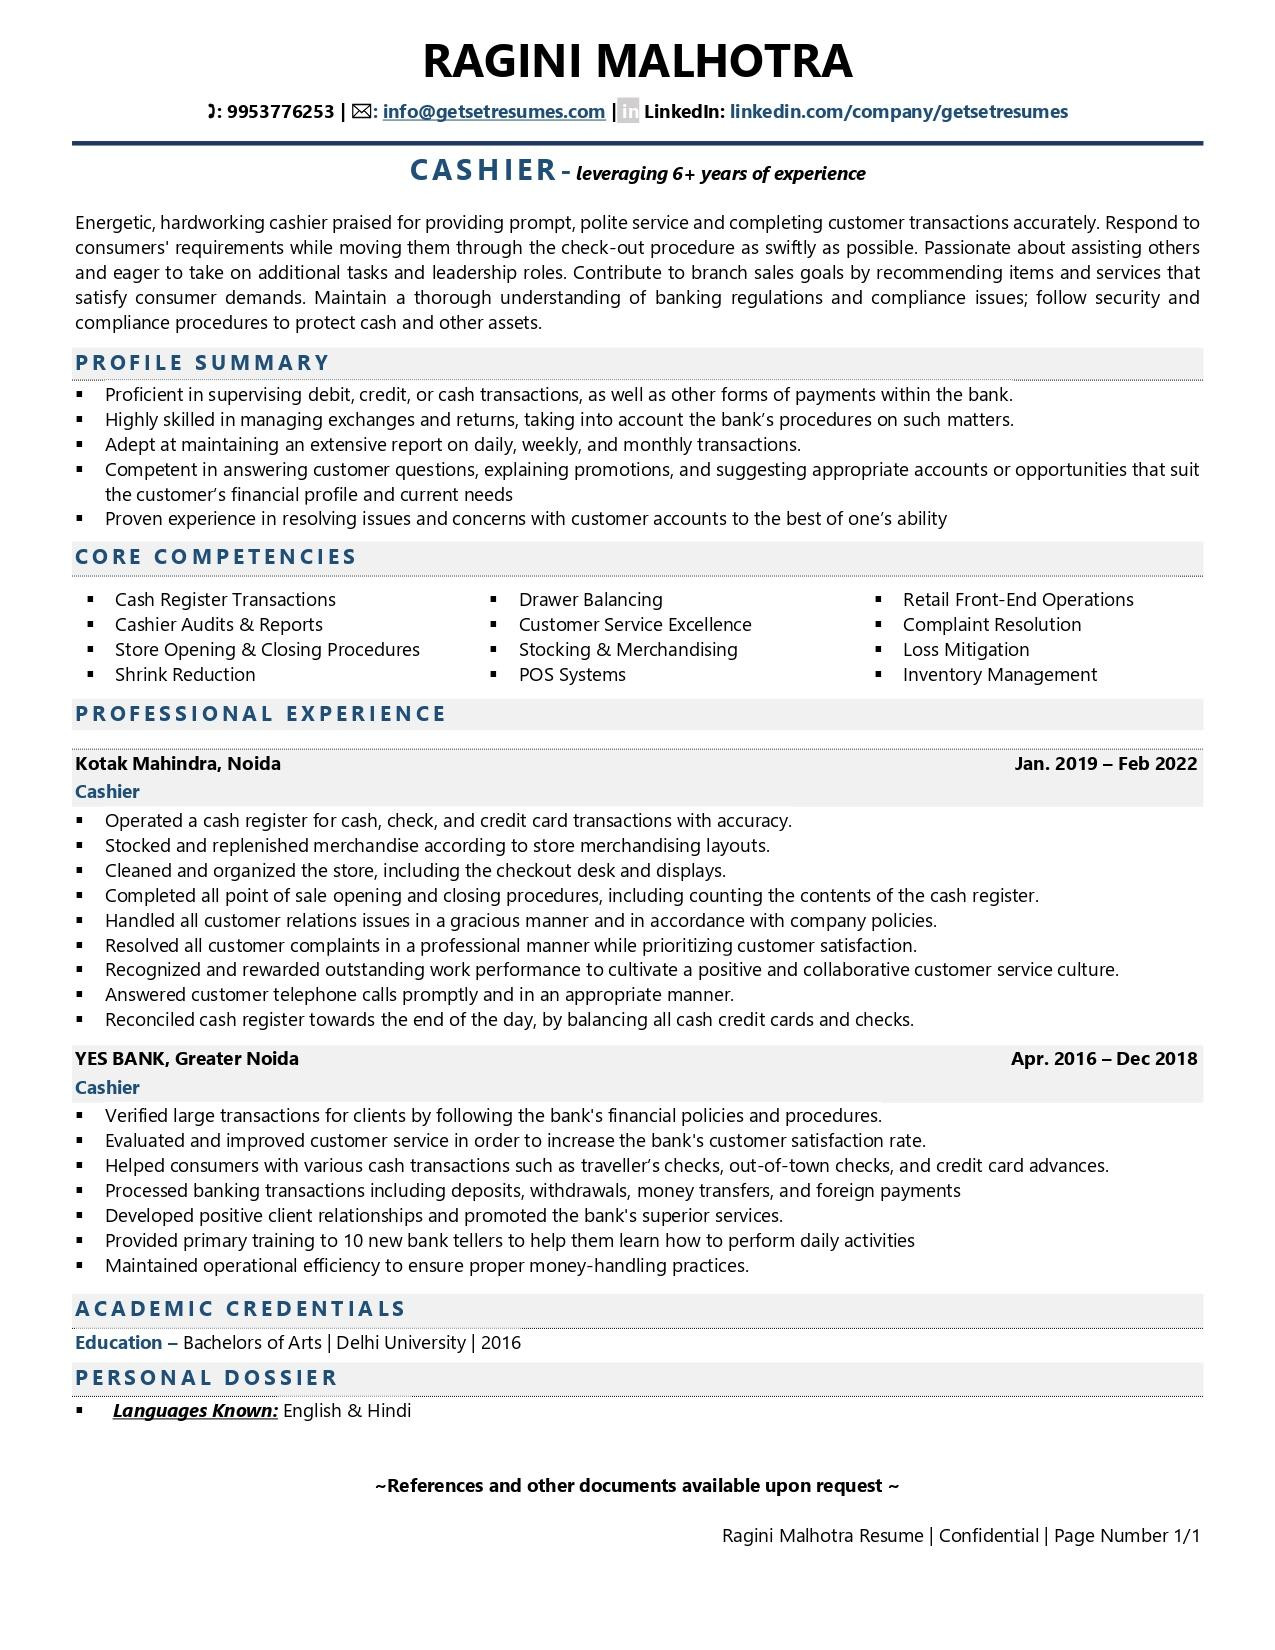 Banking Customer order Management Resume Sample Cashier Resume Examples & Template (with Job Winning Tips)